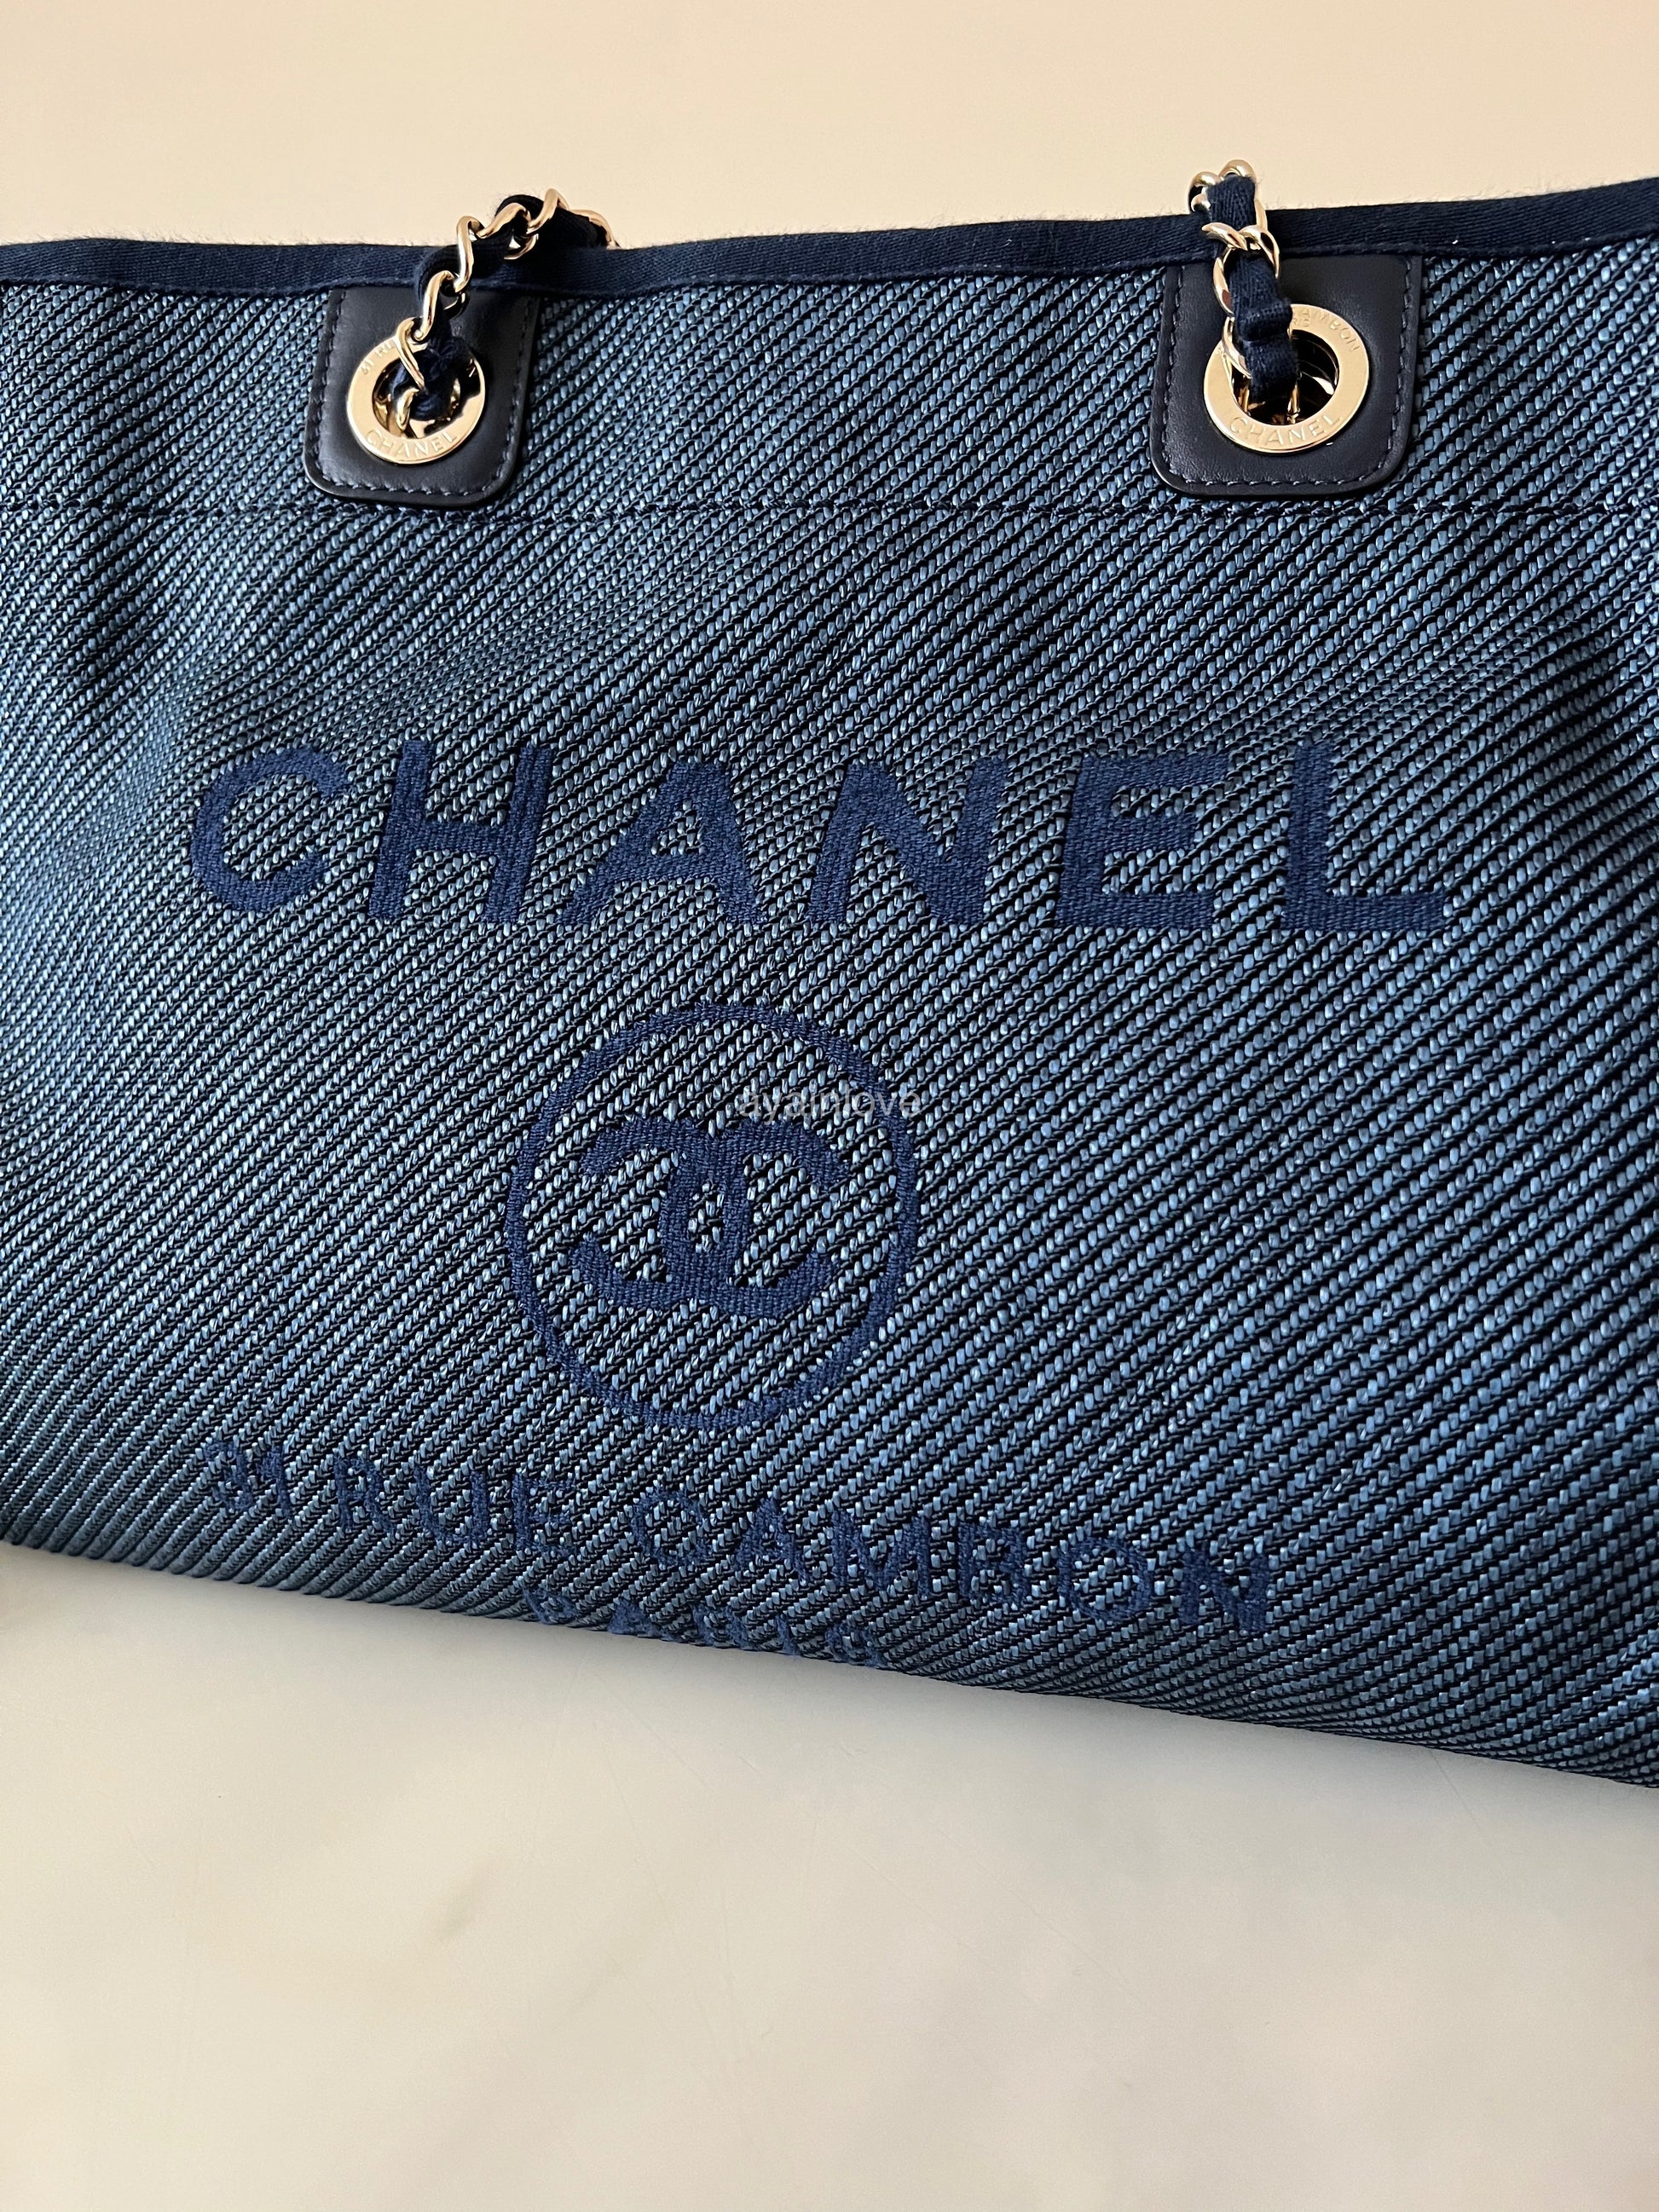 Chanel Deauville / Small 